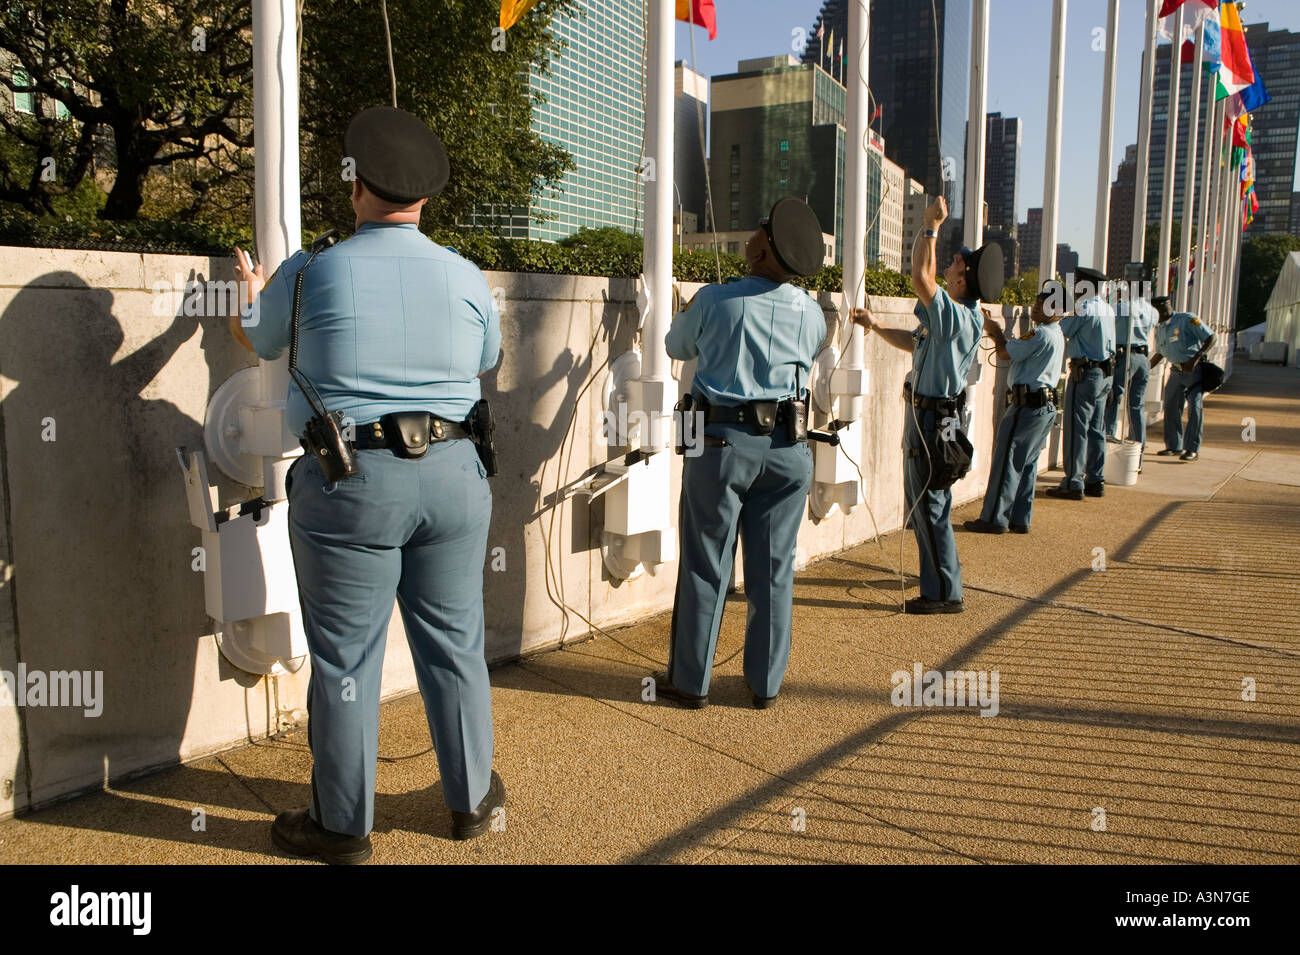 United Nations security guards raise the member states flags in front of the UN general secretariat building on 1st avenue in Ne Stock Photo